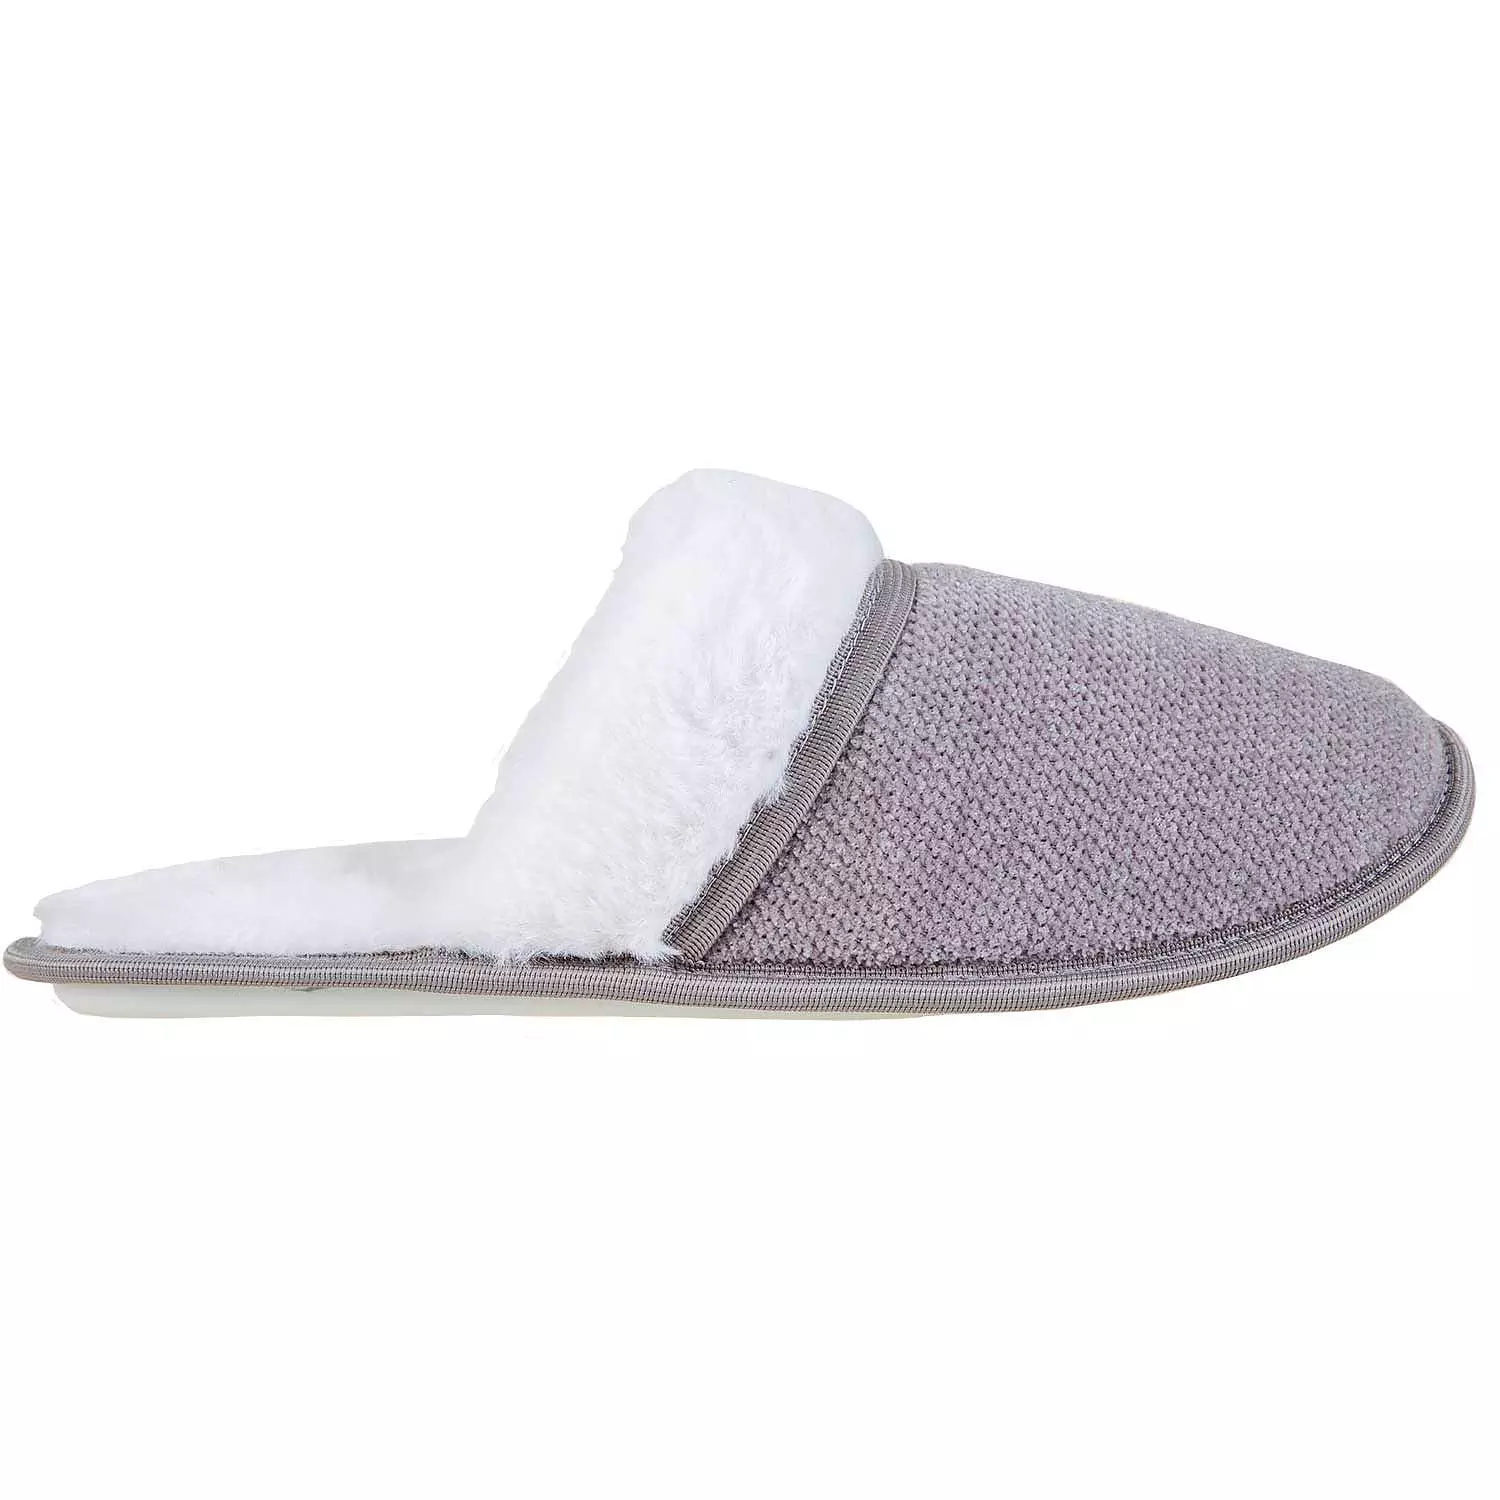 Faux fur lined and cuffed slippers, grey, small (S)